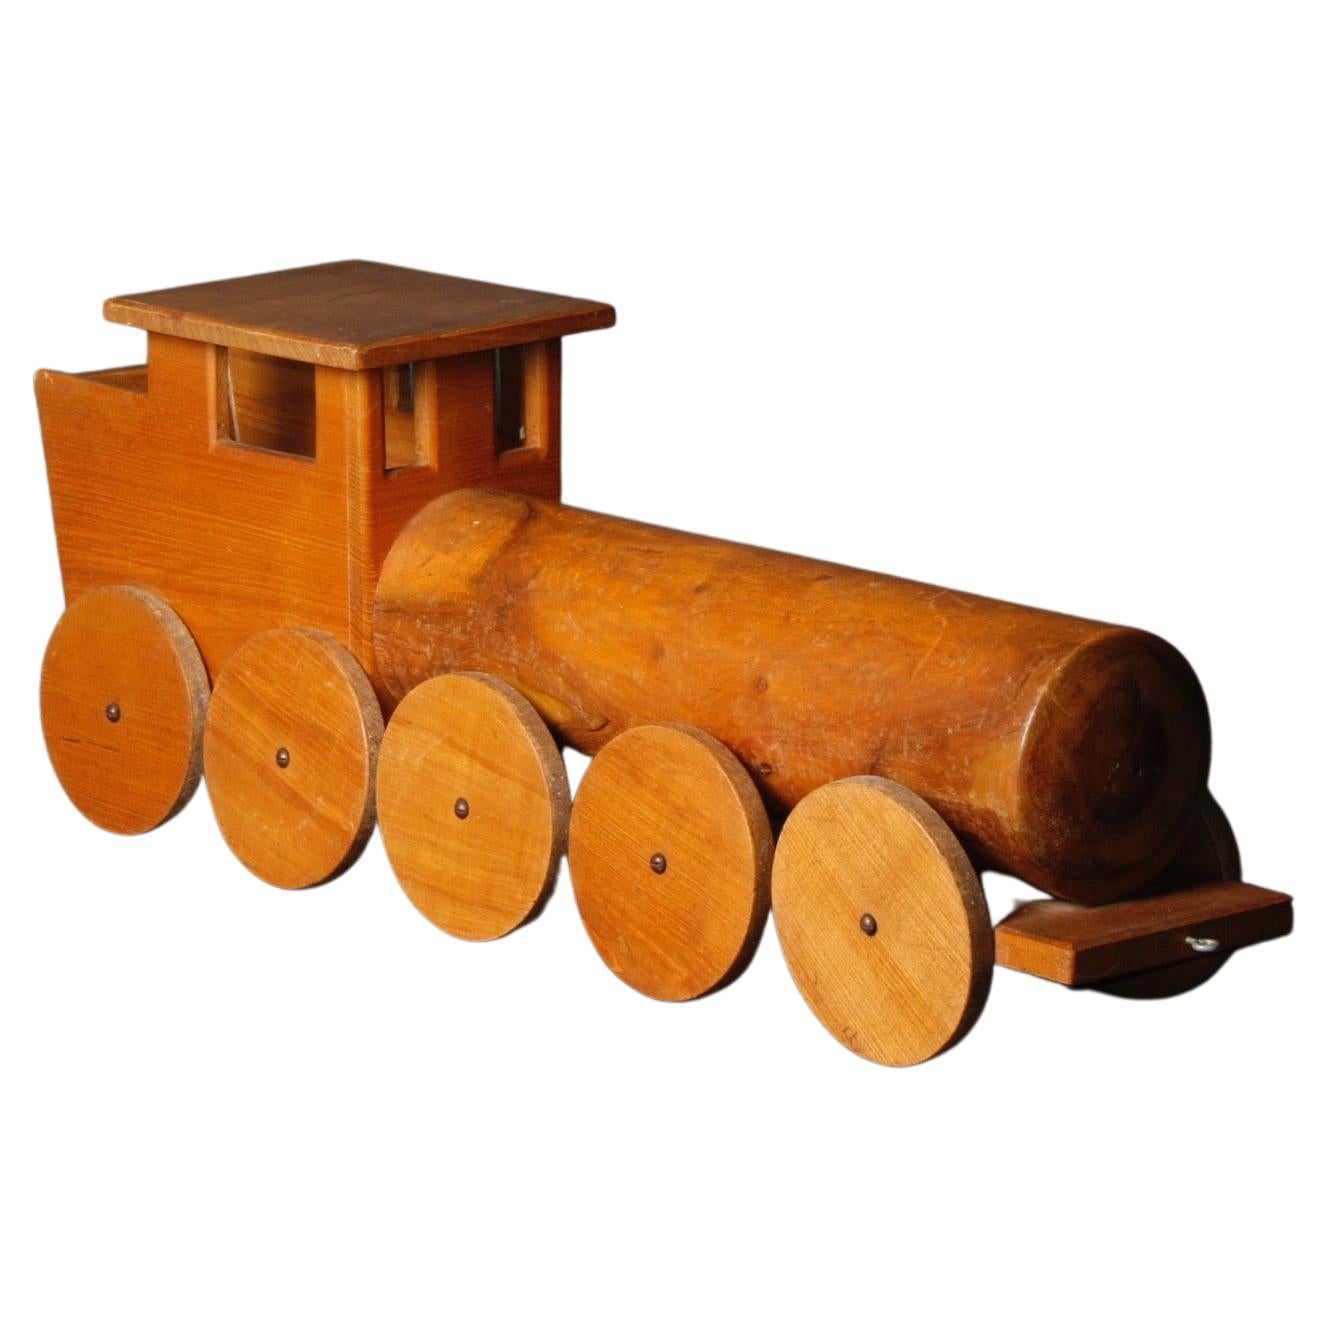 Big locomotive toy with solid wood